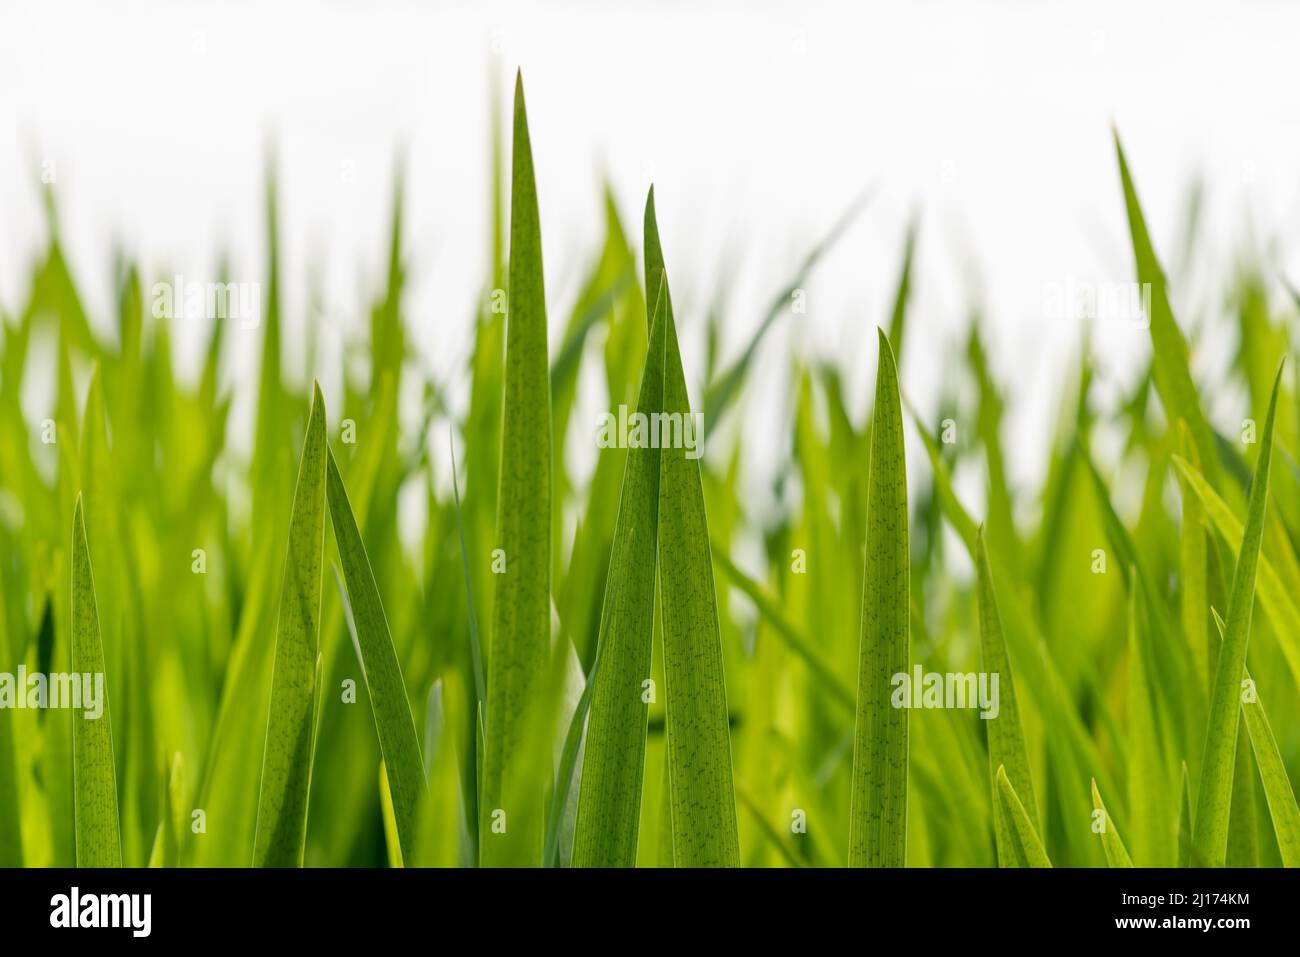 Narrow green leaves against bright sky close-up view Stock Photo